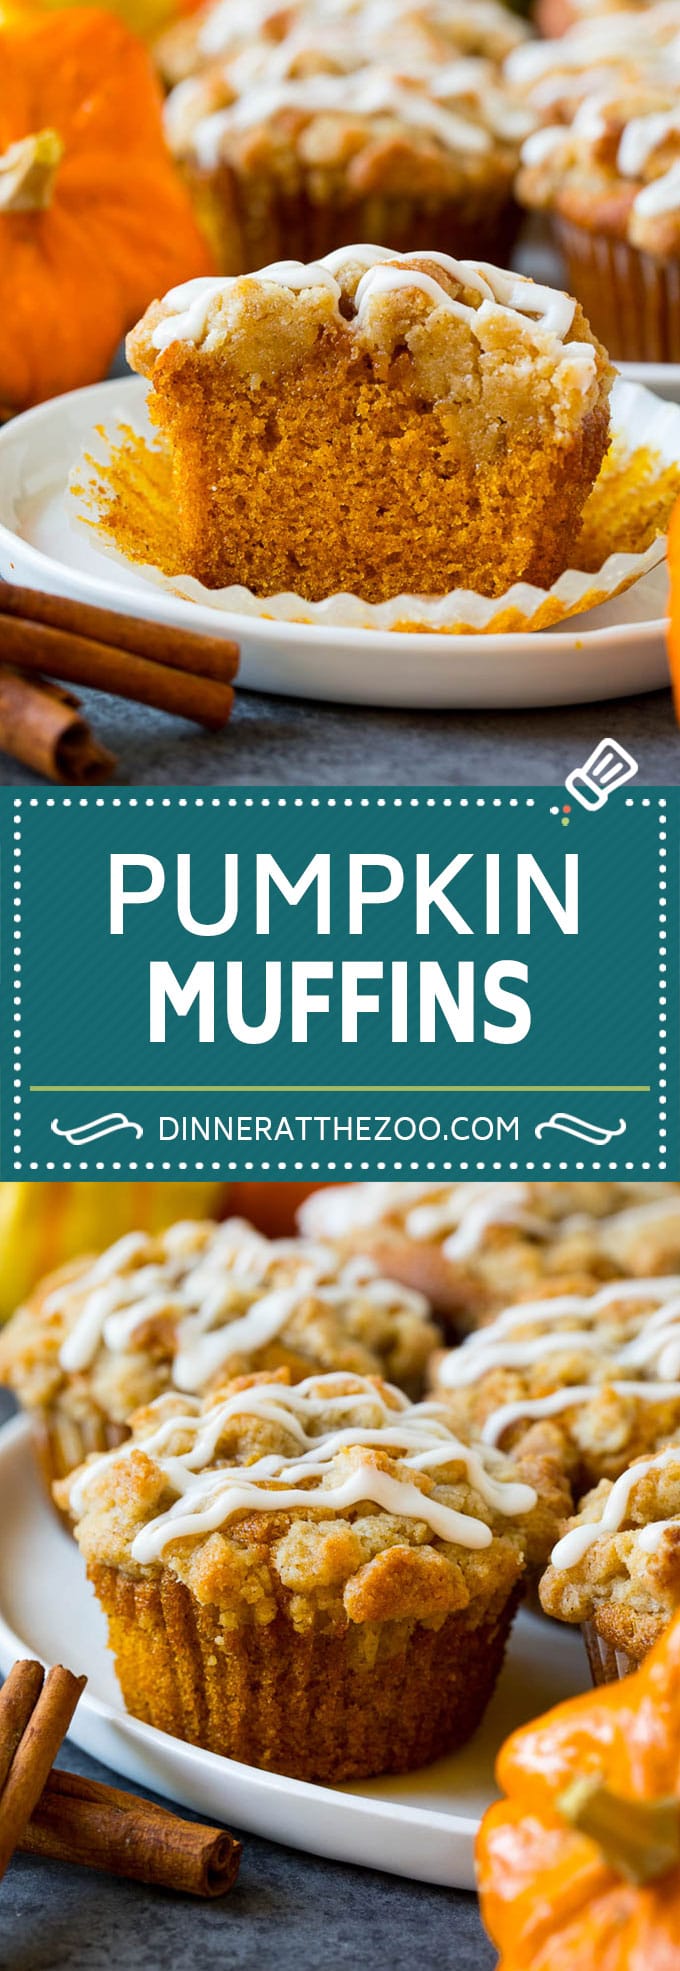 These pumpkin muffins are light and tender treats filled with plenty of pumpkin puree and spice, then topped with brown sugar streusel and baked to perfection. The ultimate fall breakfast or snack option.